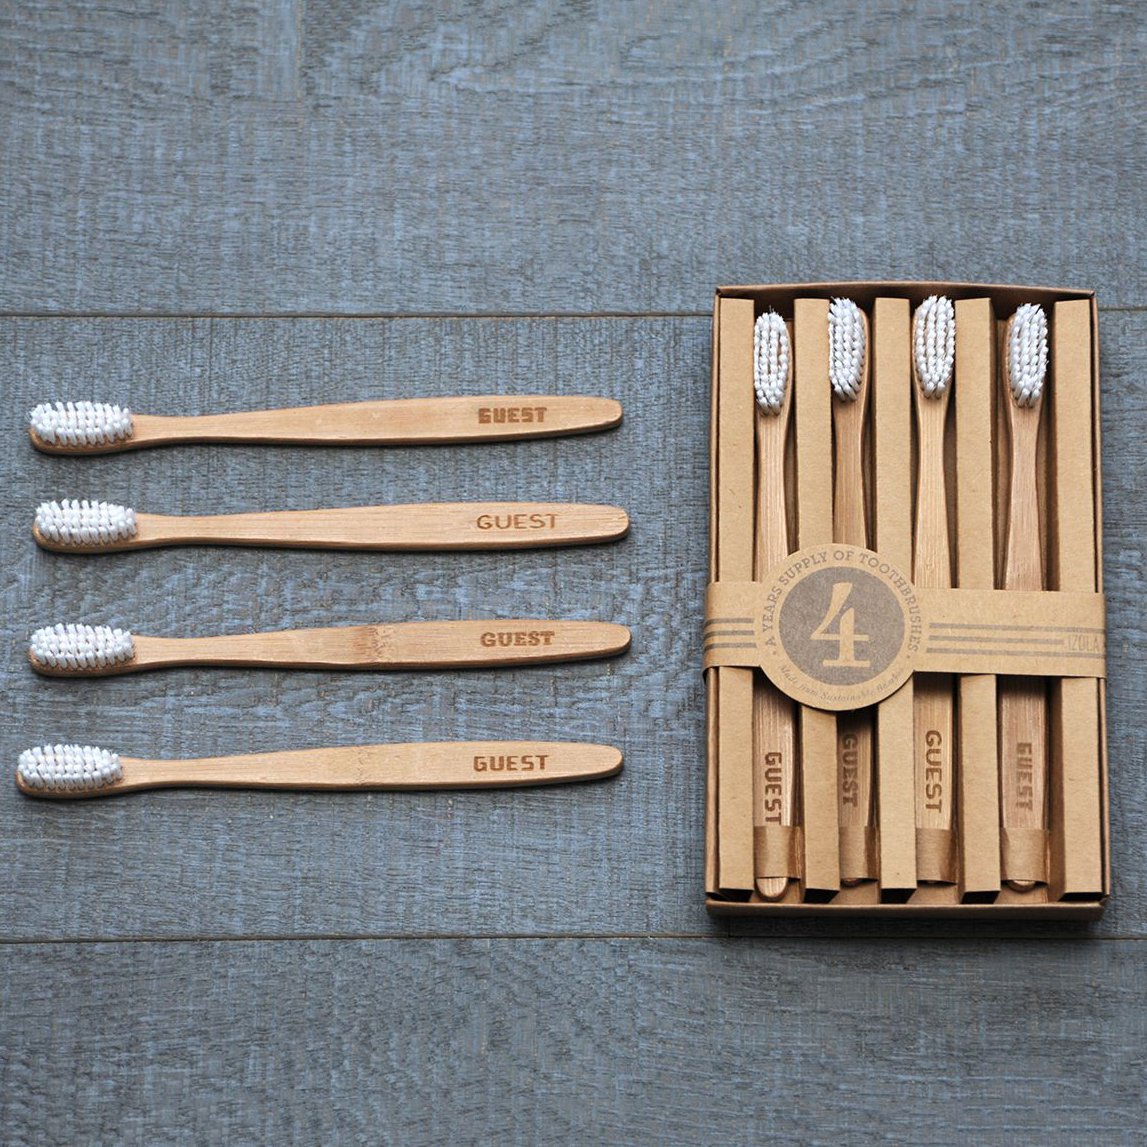 Guest Toothbrush Set by Izola